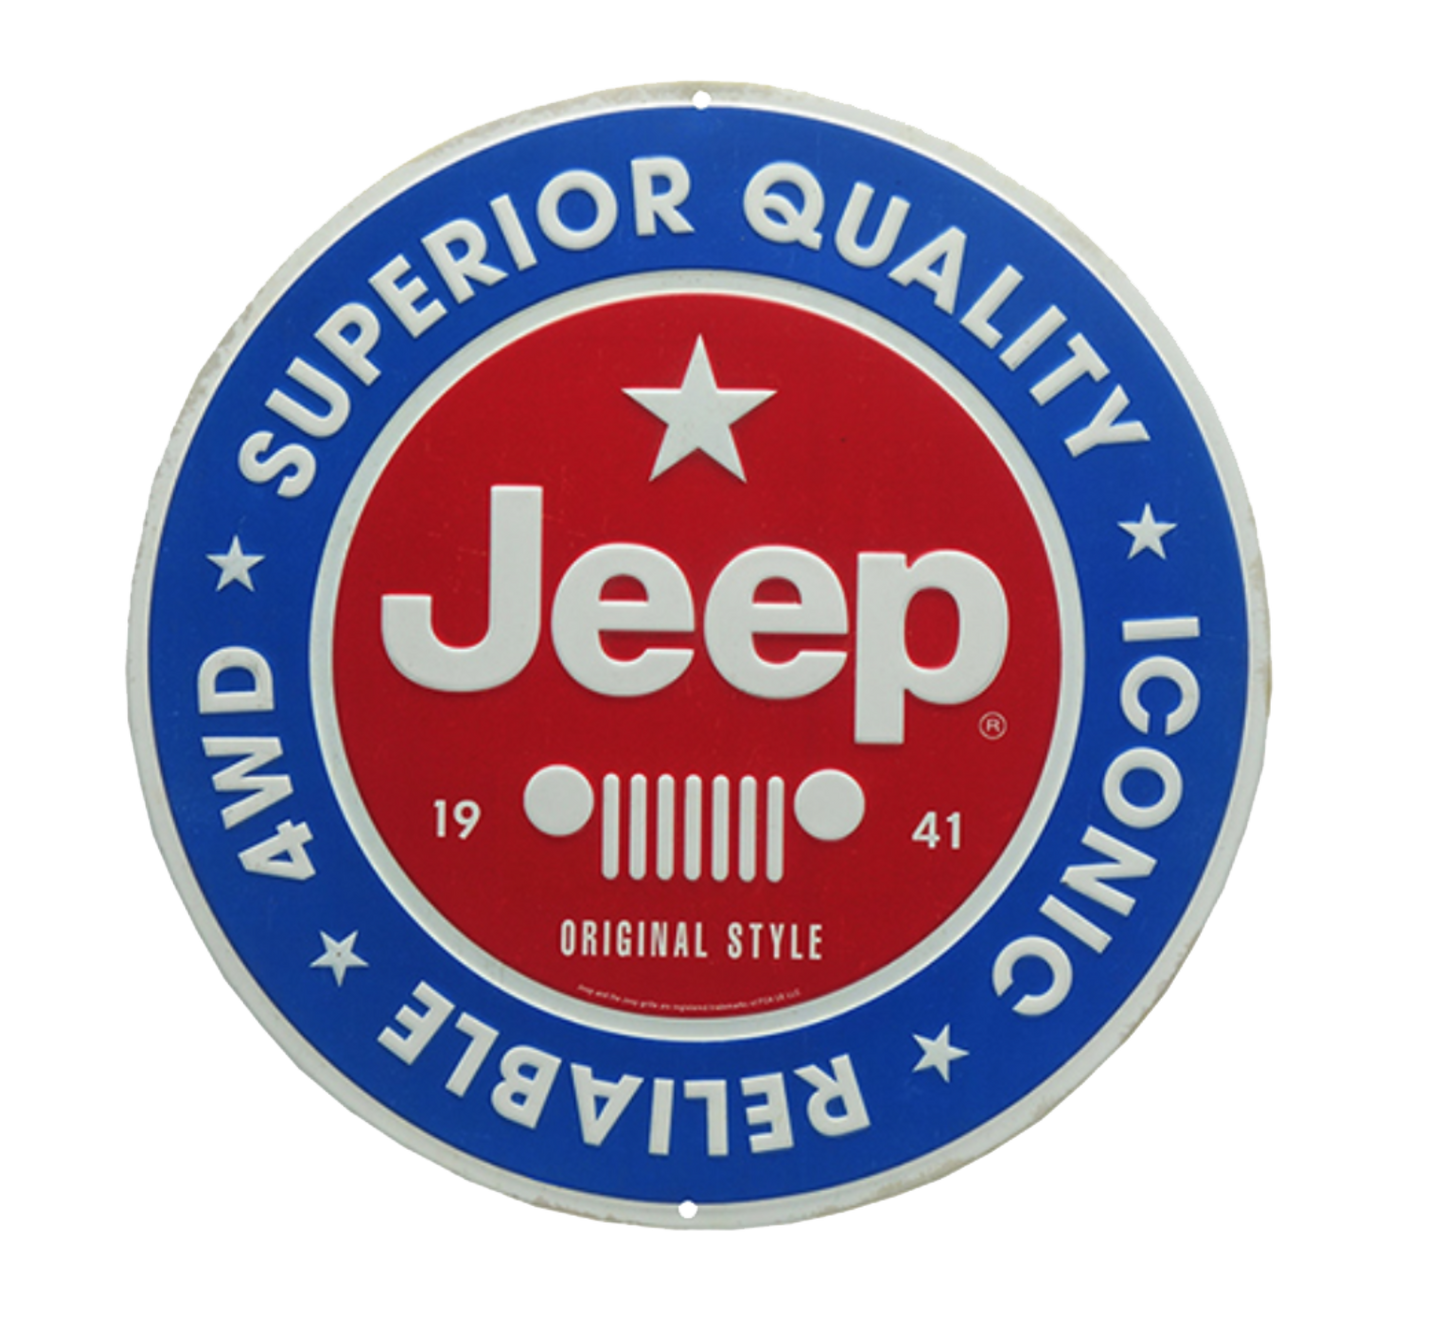 Round embossed tin sign with Jeep logo in red and blue, symbolizing superior quality and original style.